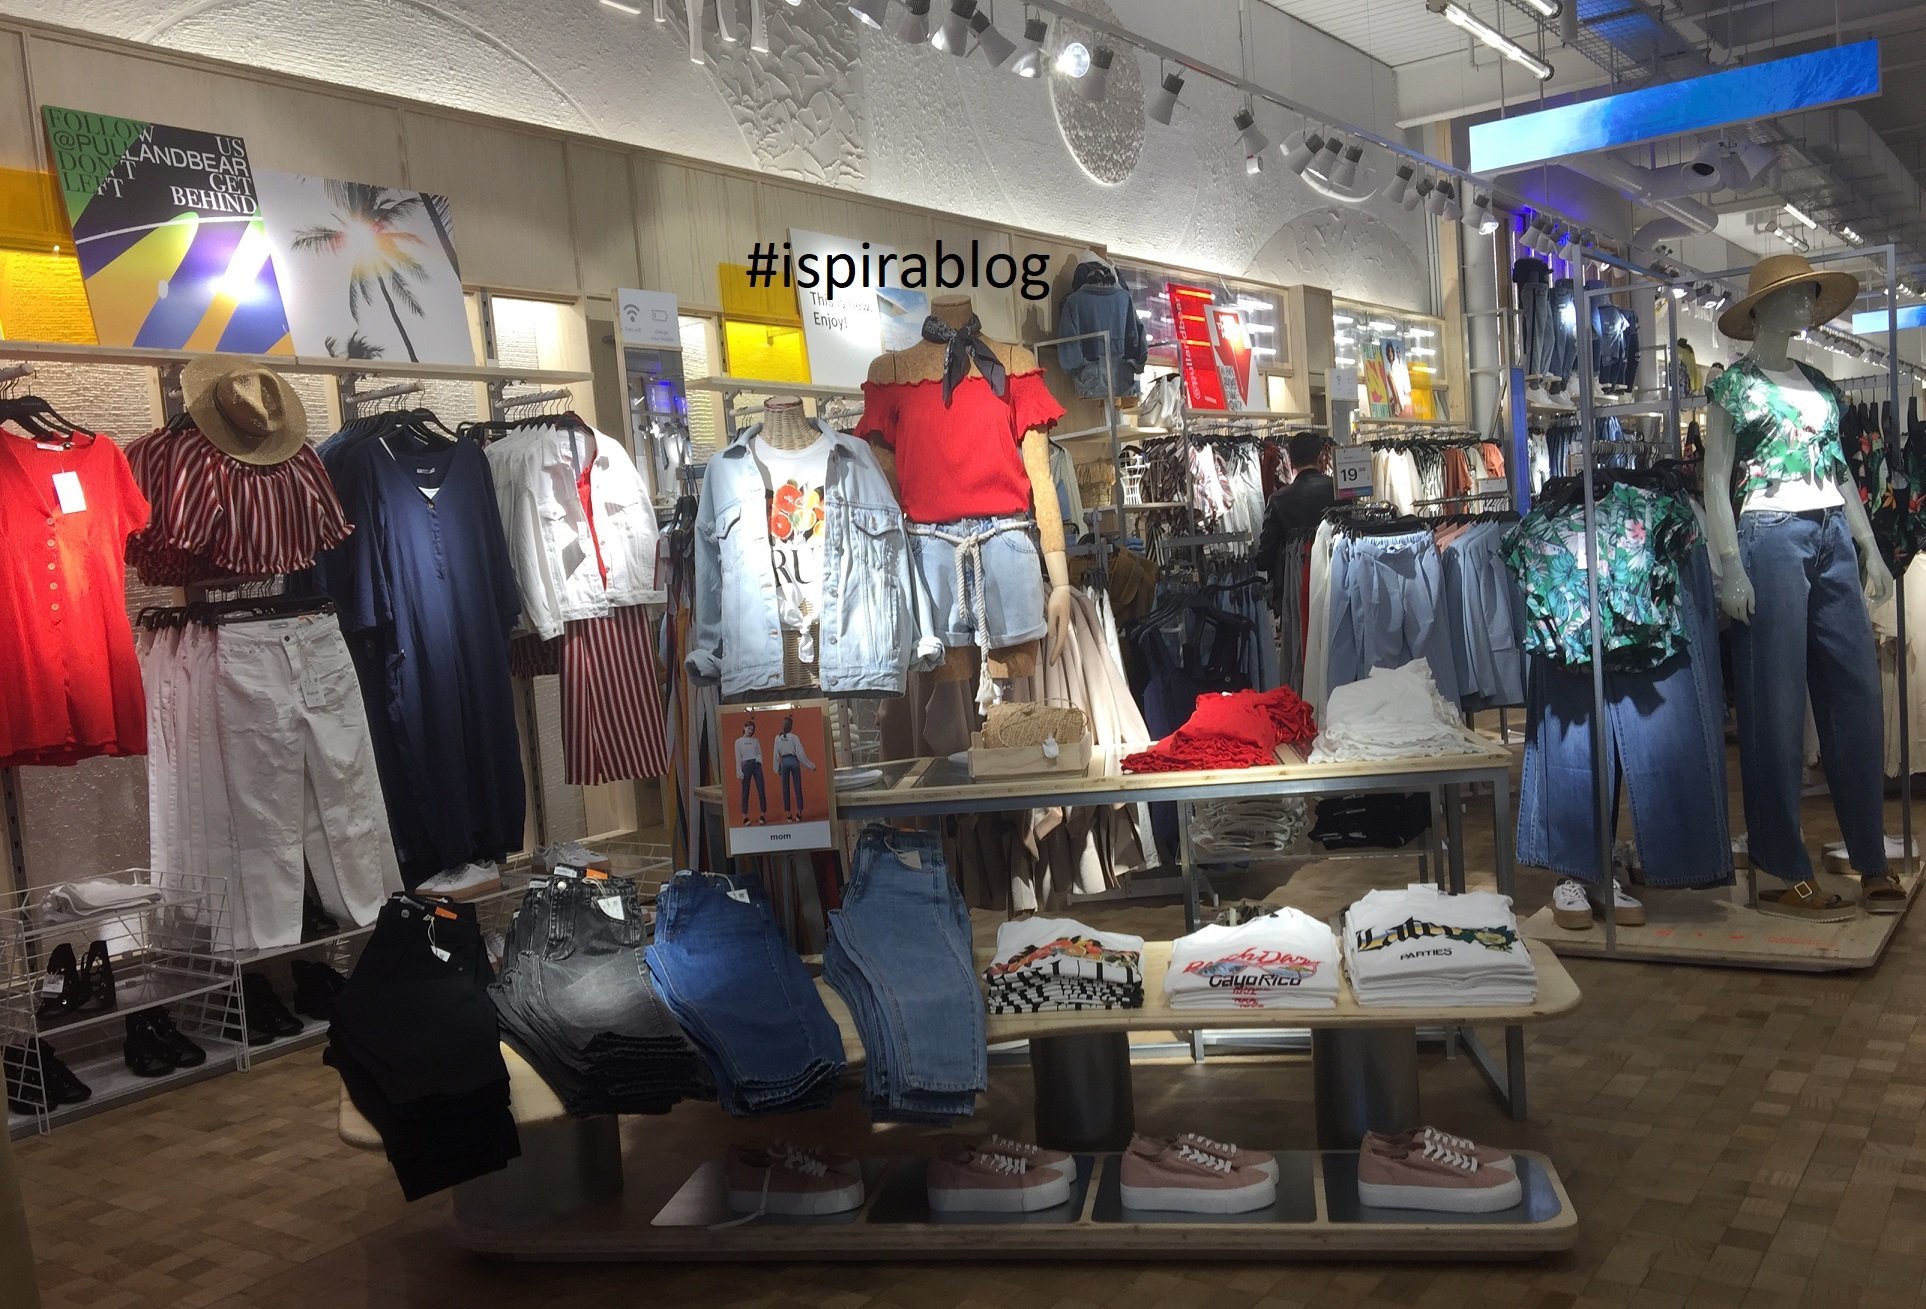 Pull & Bear Fashion Store Editorial Stock Image - Image of pull